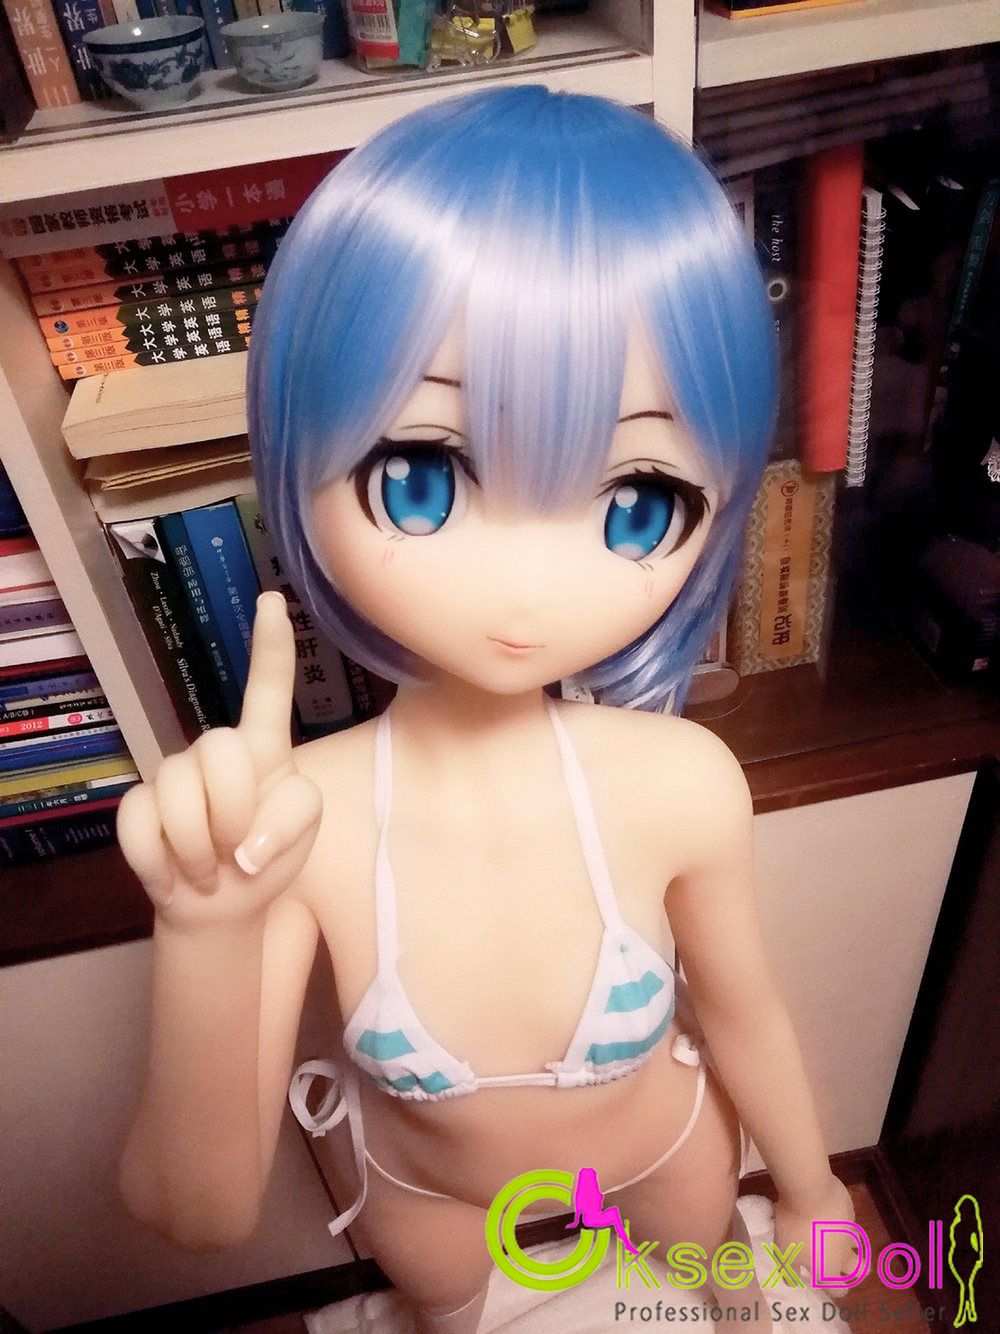 Aotume doll pic